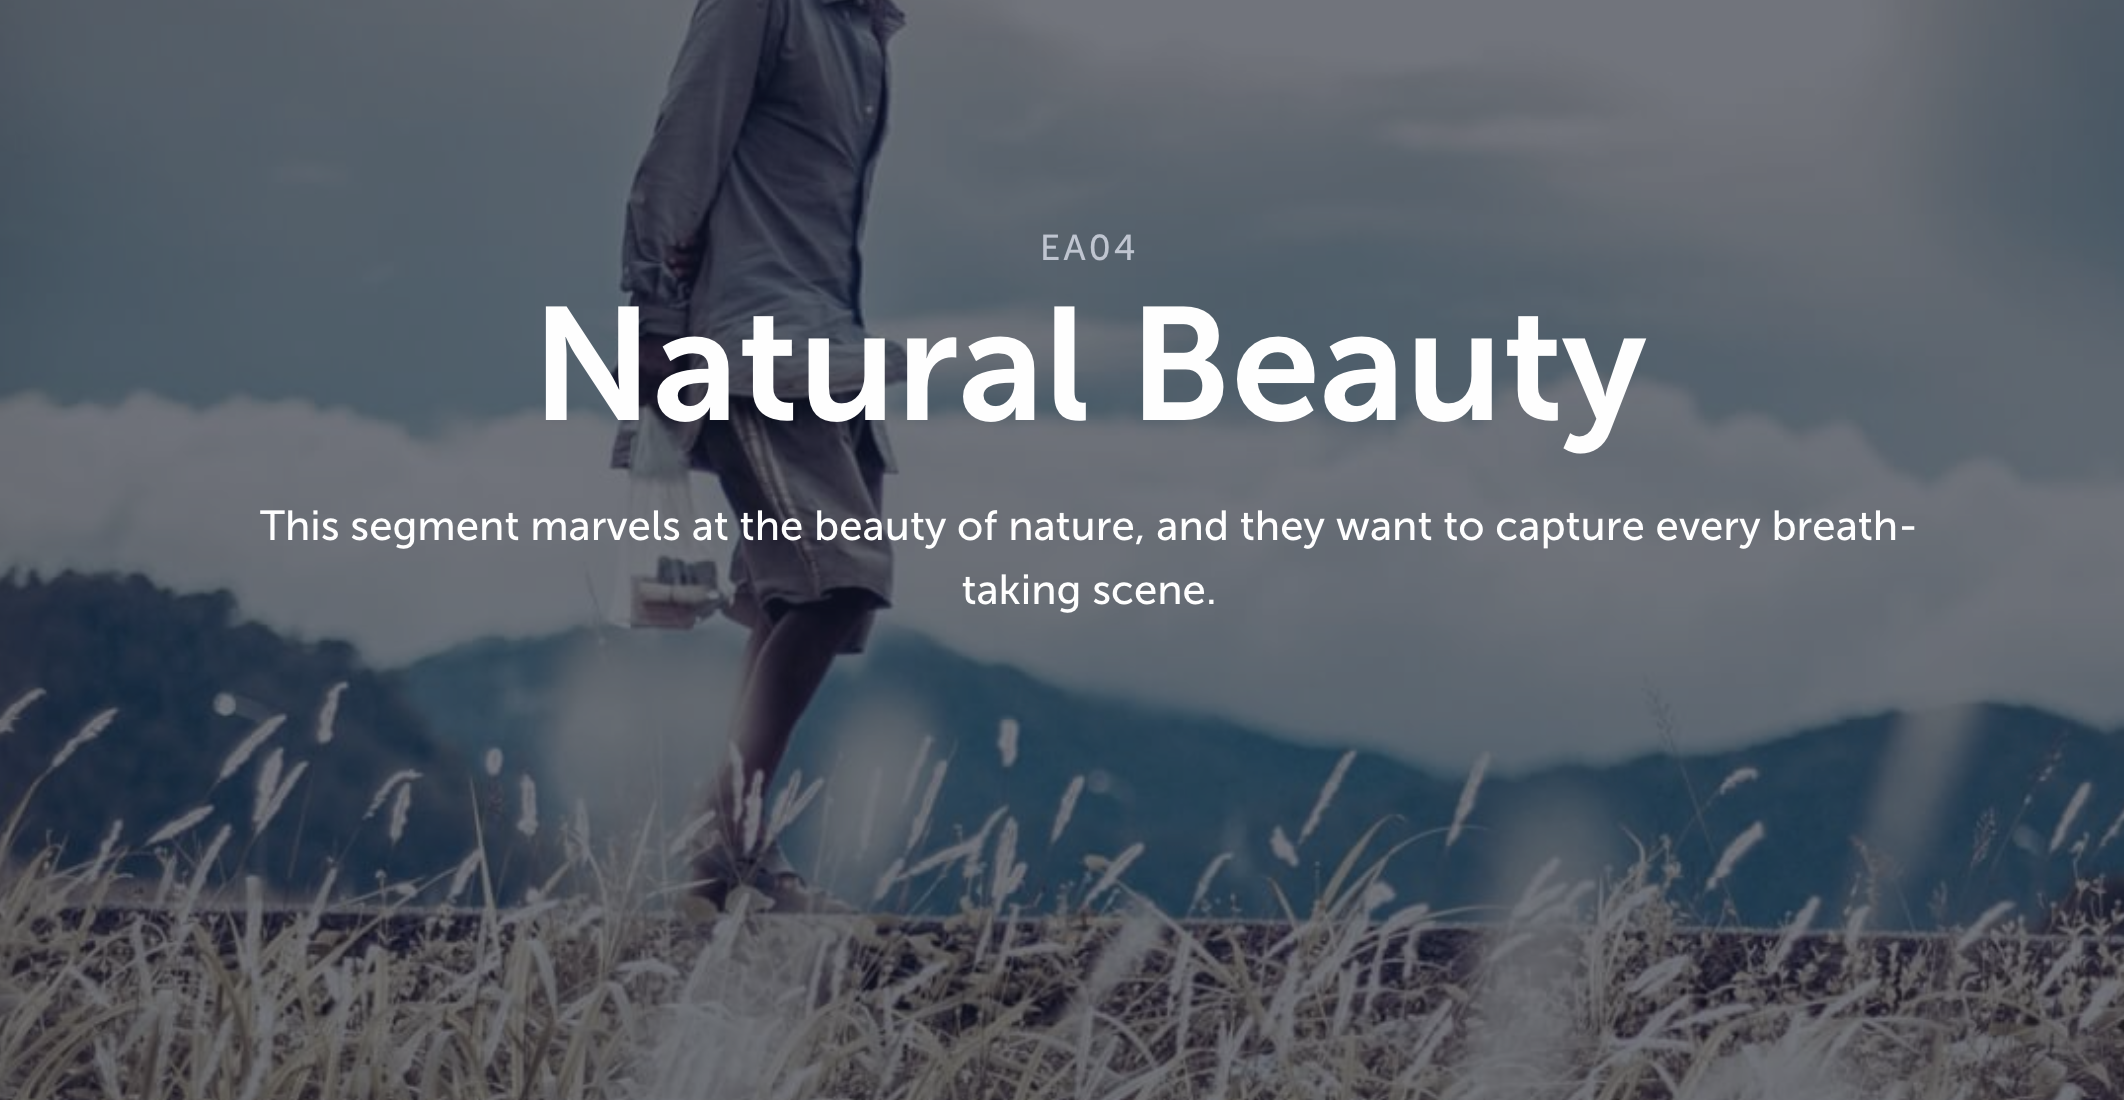 Natural Beauty Imagery